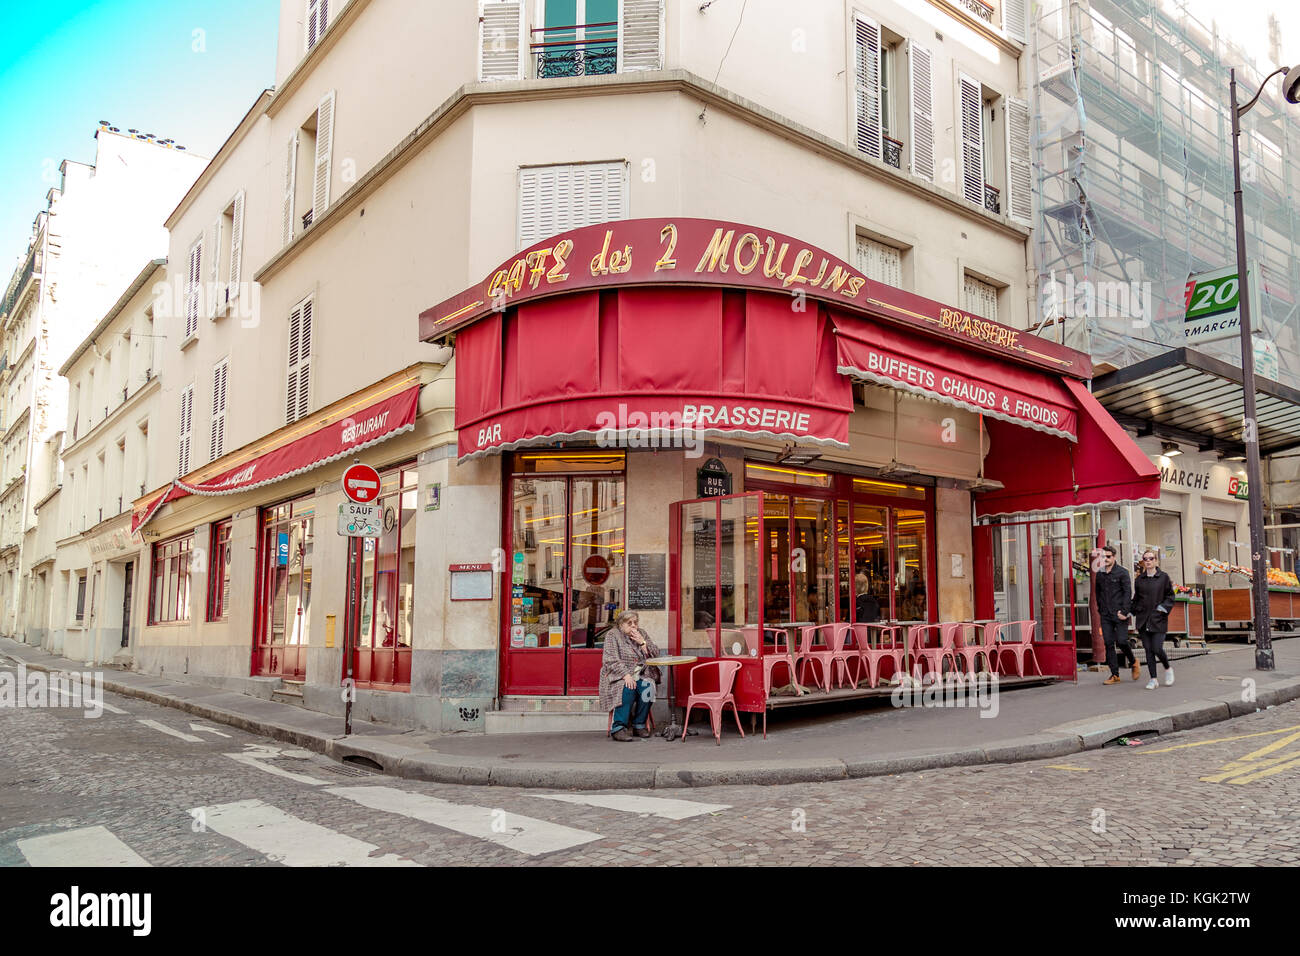 Paris, France, March 26, 2017: The Cafe des 2 Moulins French for 'Two Windmills' is a cafe in the Montmartre Stock Photo